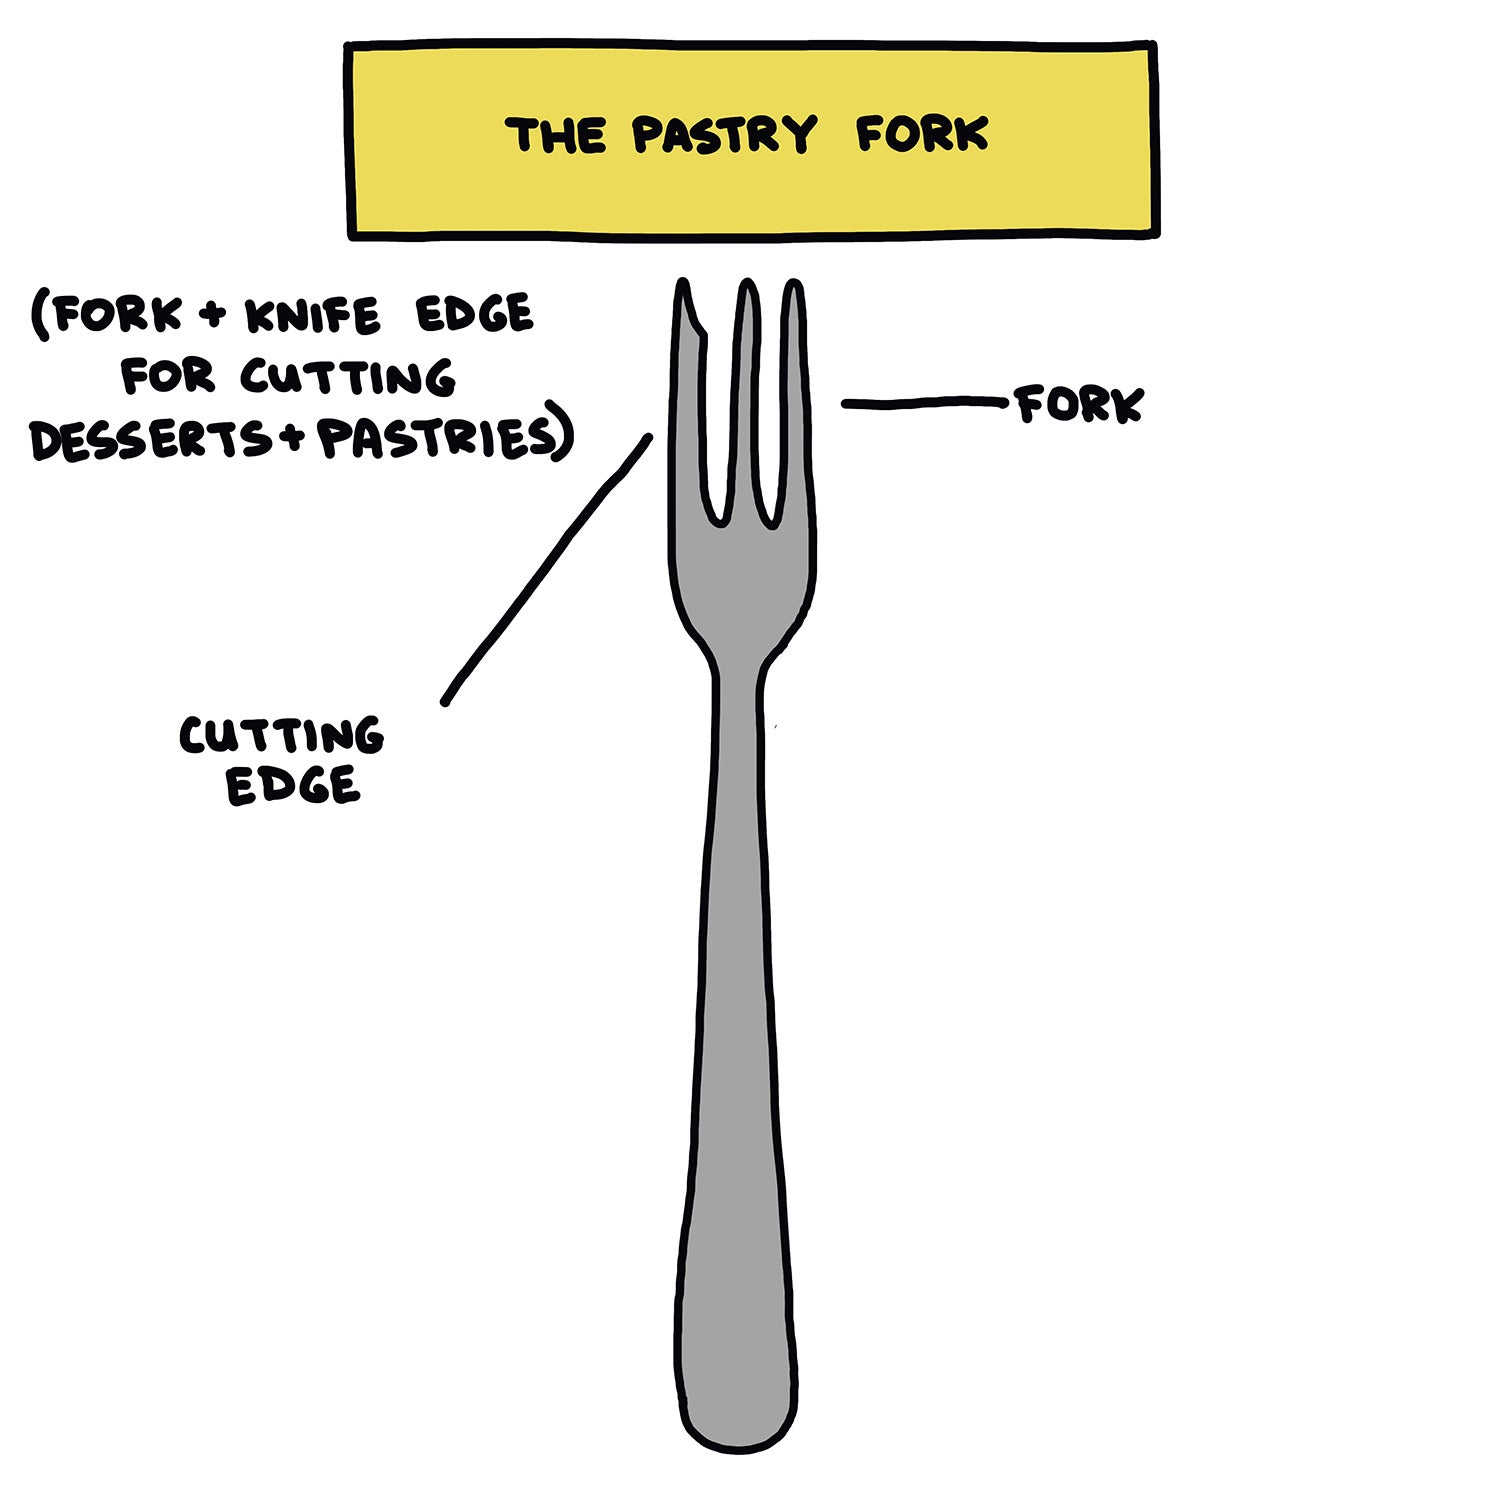 The Pastry Fork